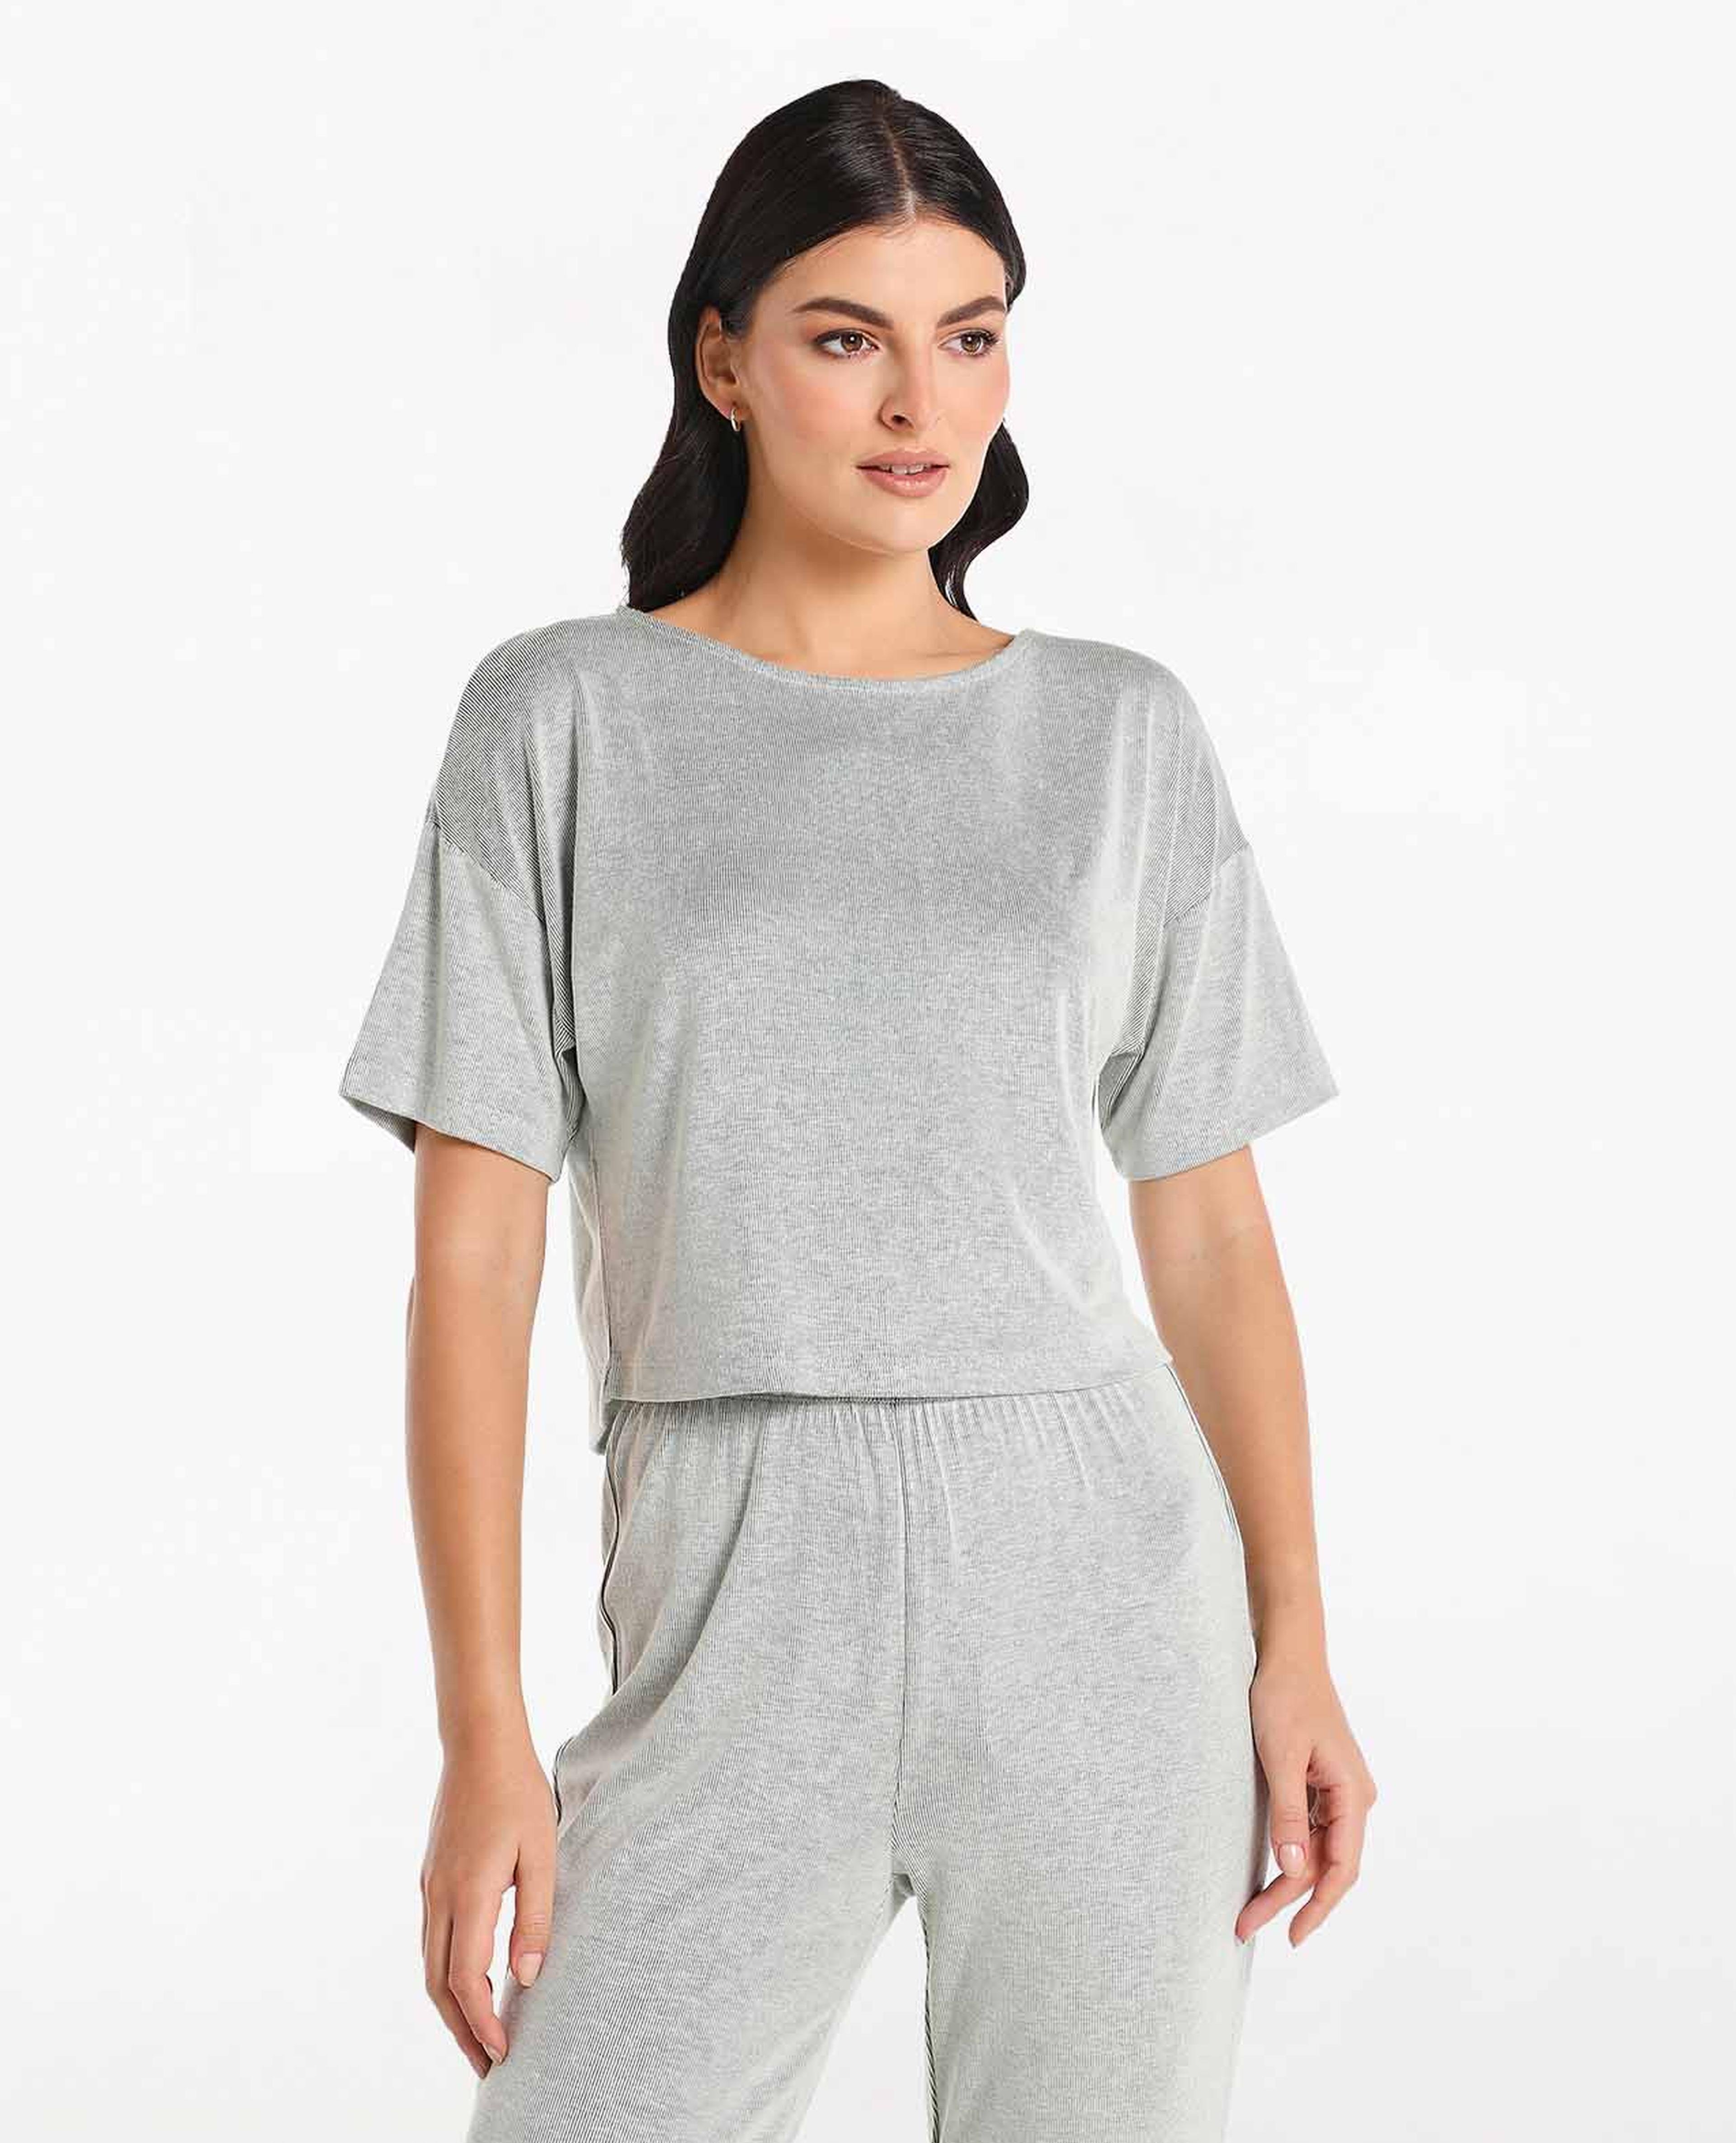 Basic Solid Boxy Night Top with Crew Neck and Short Sleeve